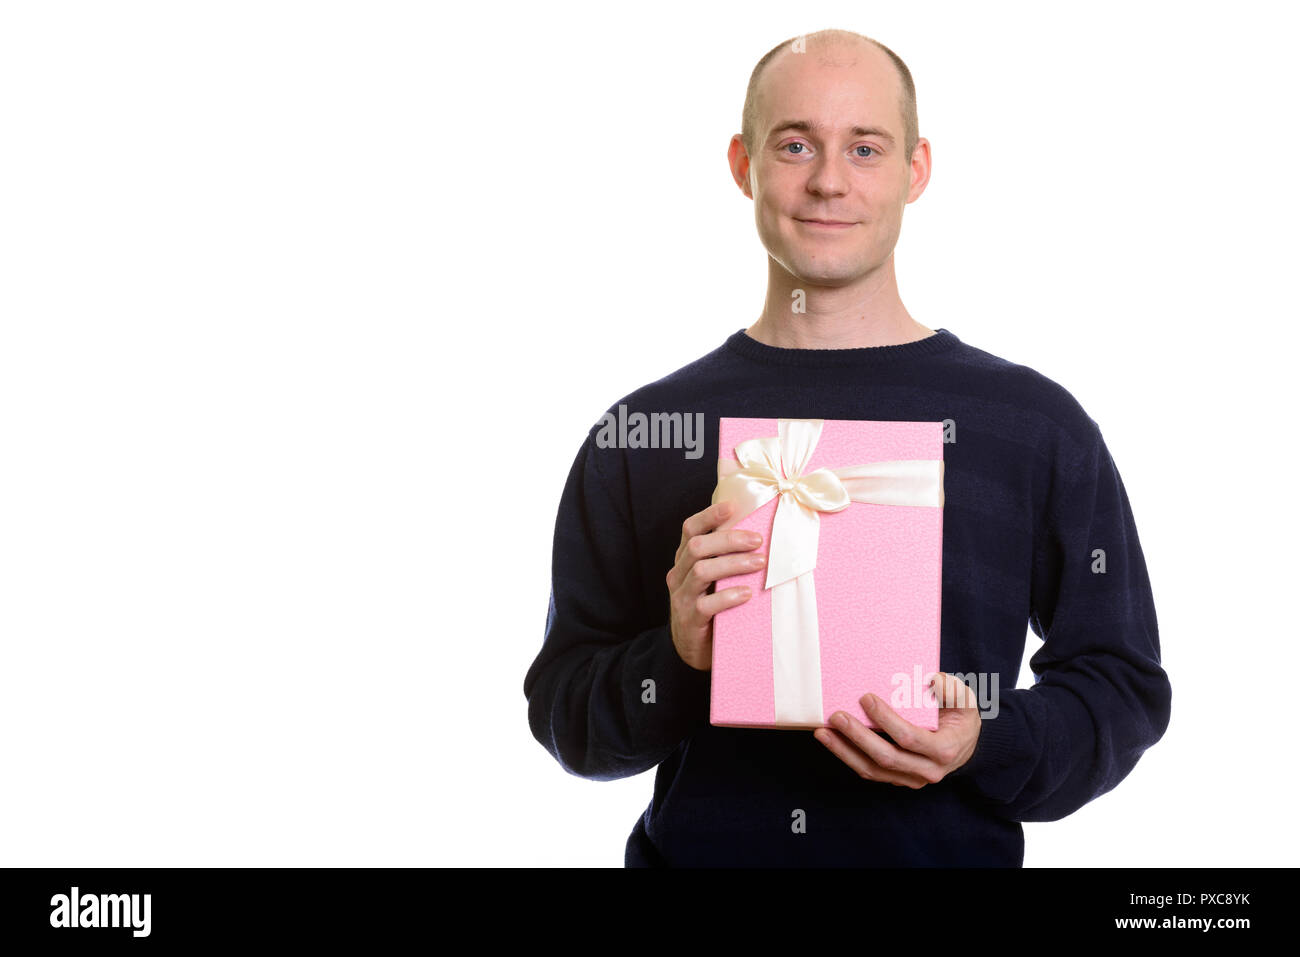 Heureux bald man smiling and holding gift box Banque D'Images